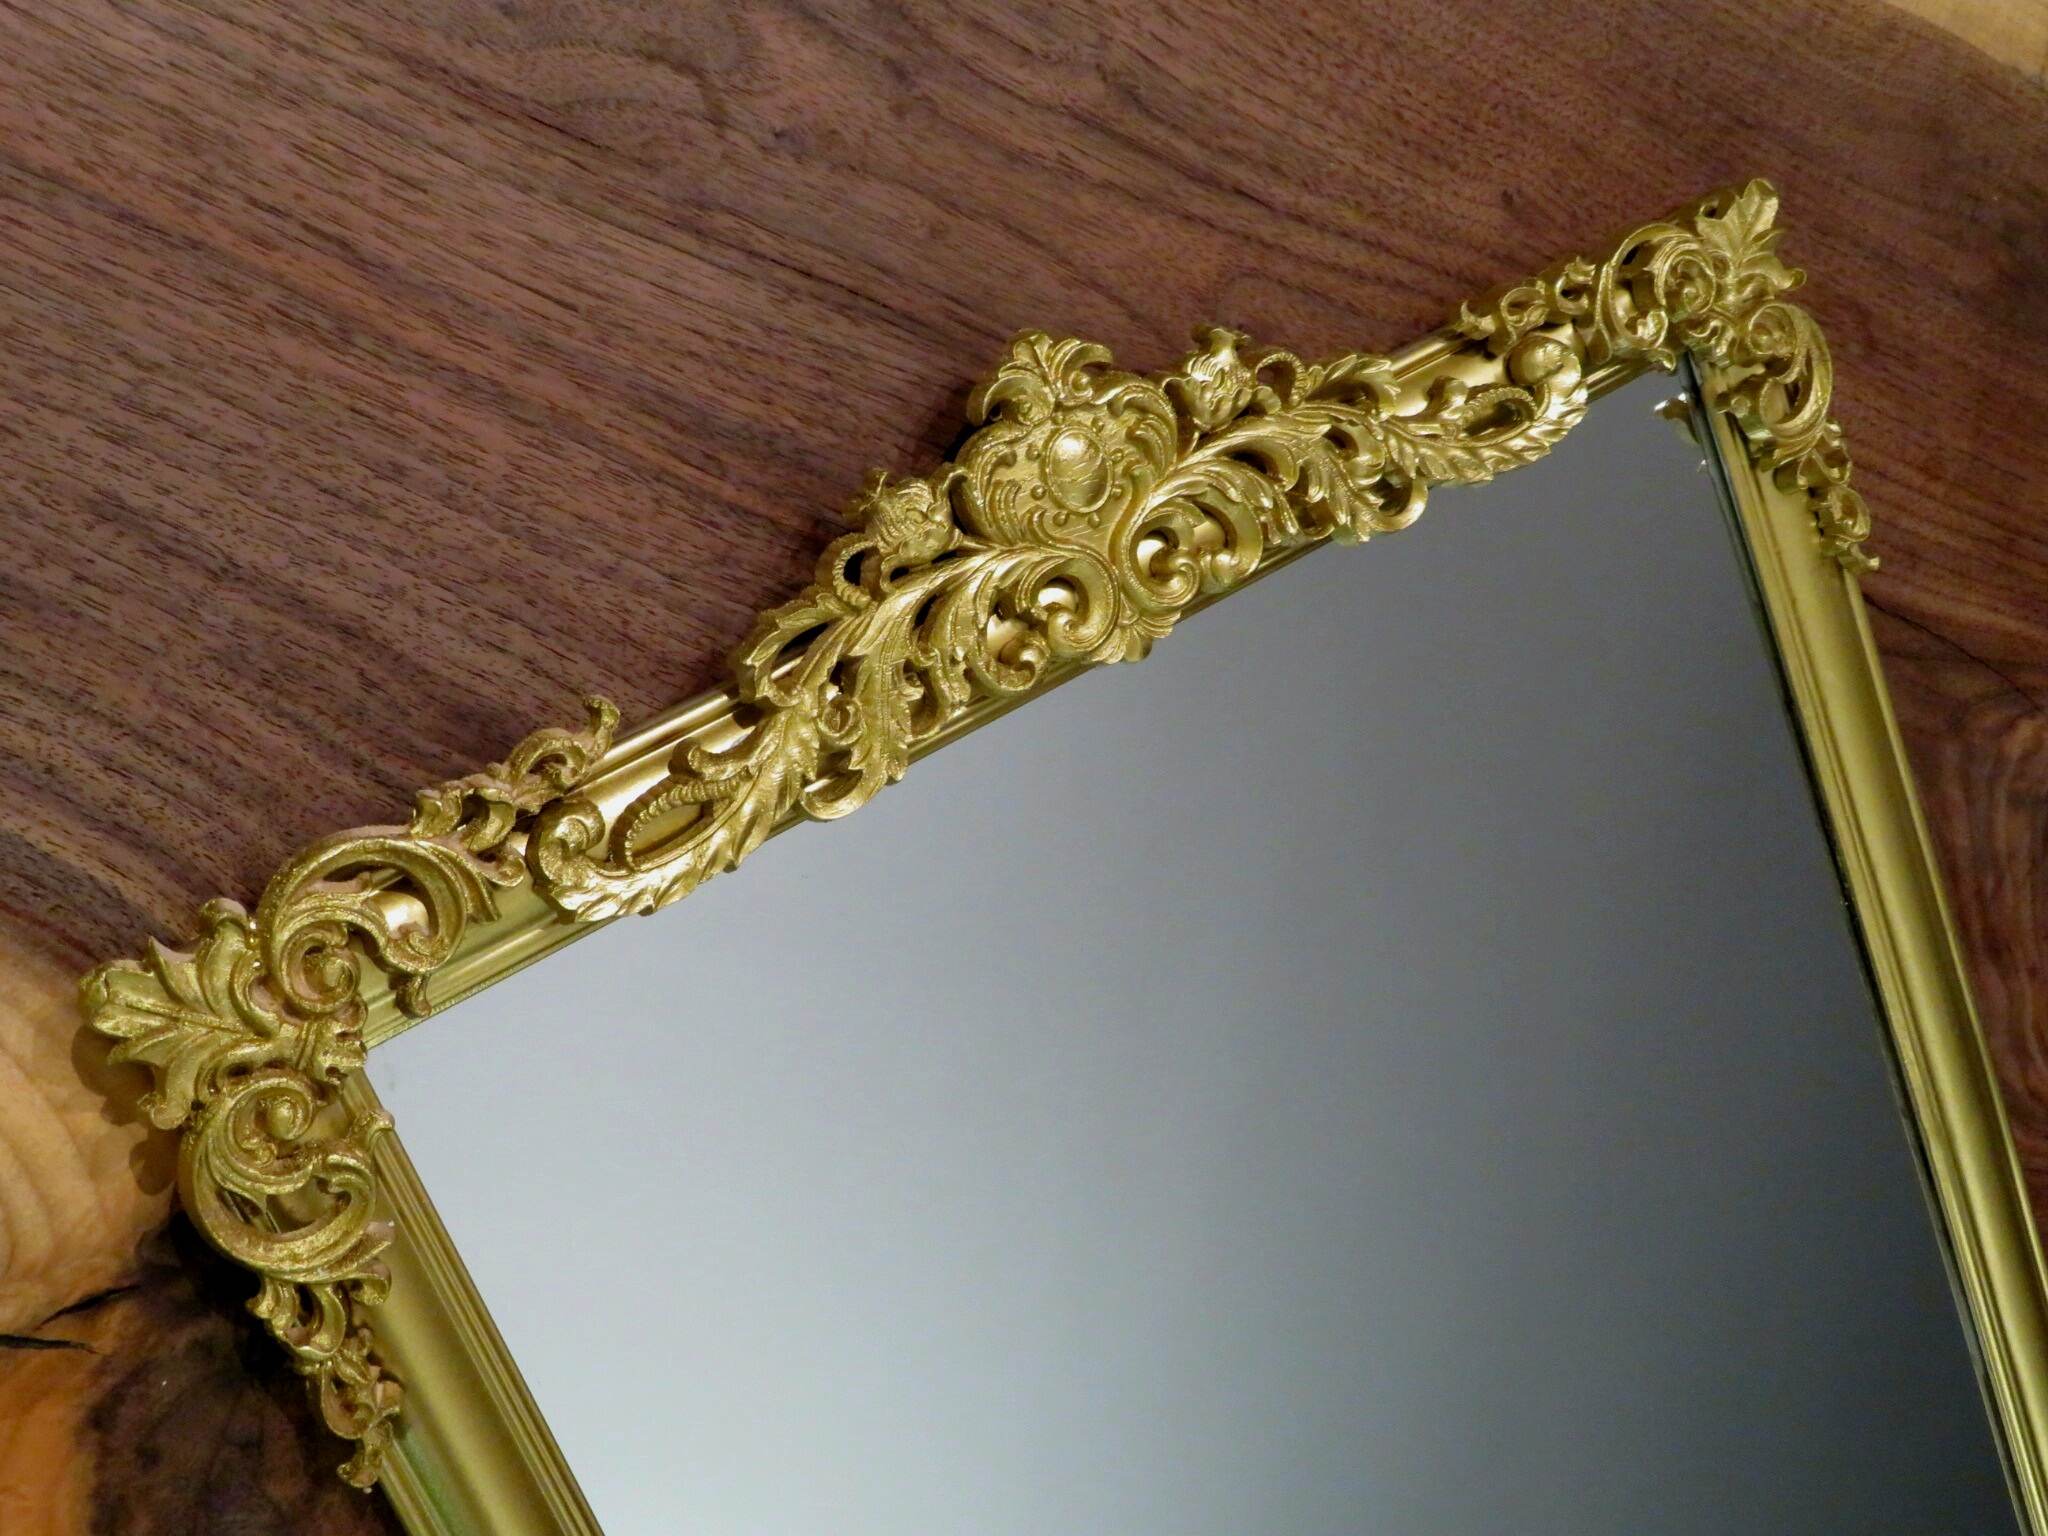 How To Make Mirror Look Antique